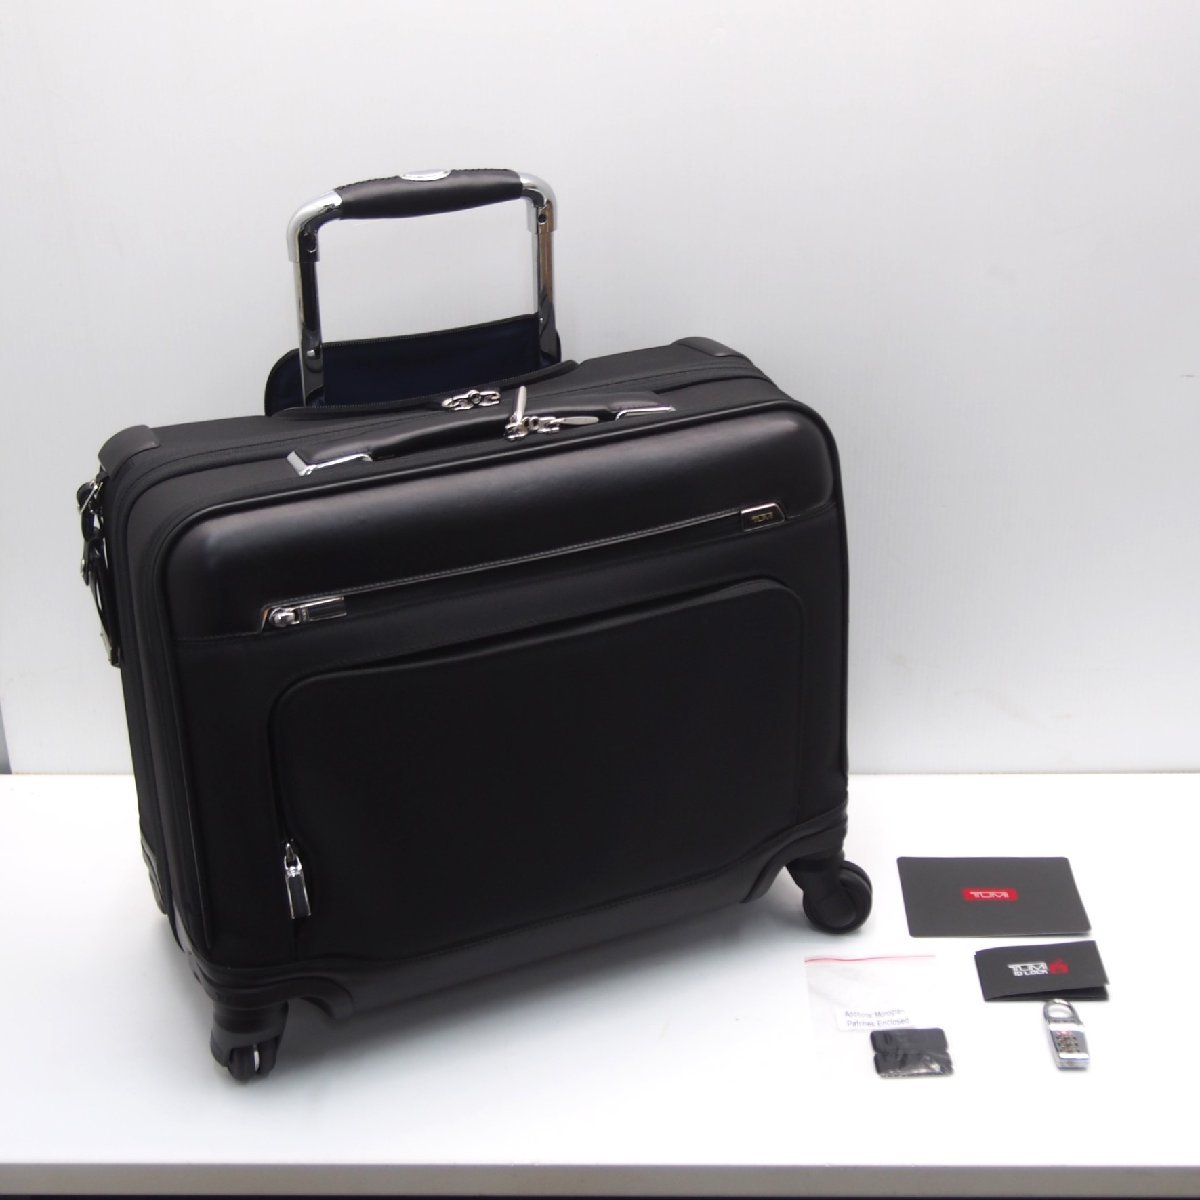 Tommy - Suitcase and trunk - Bags, suitcases - Office and shop